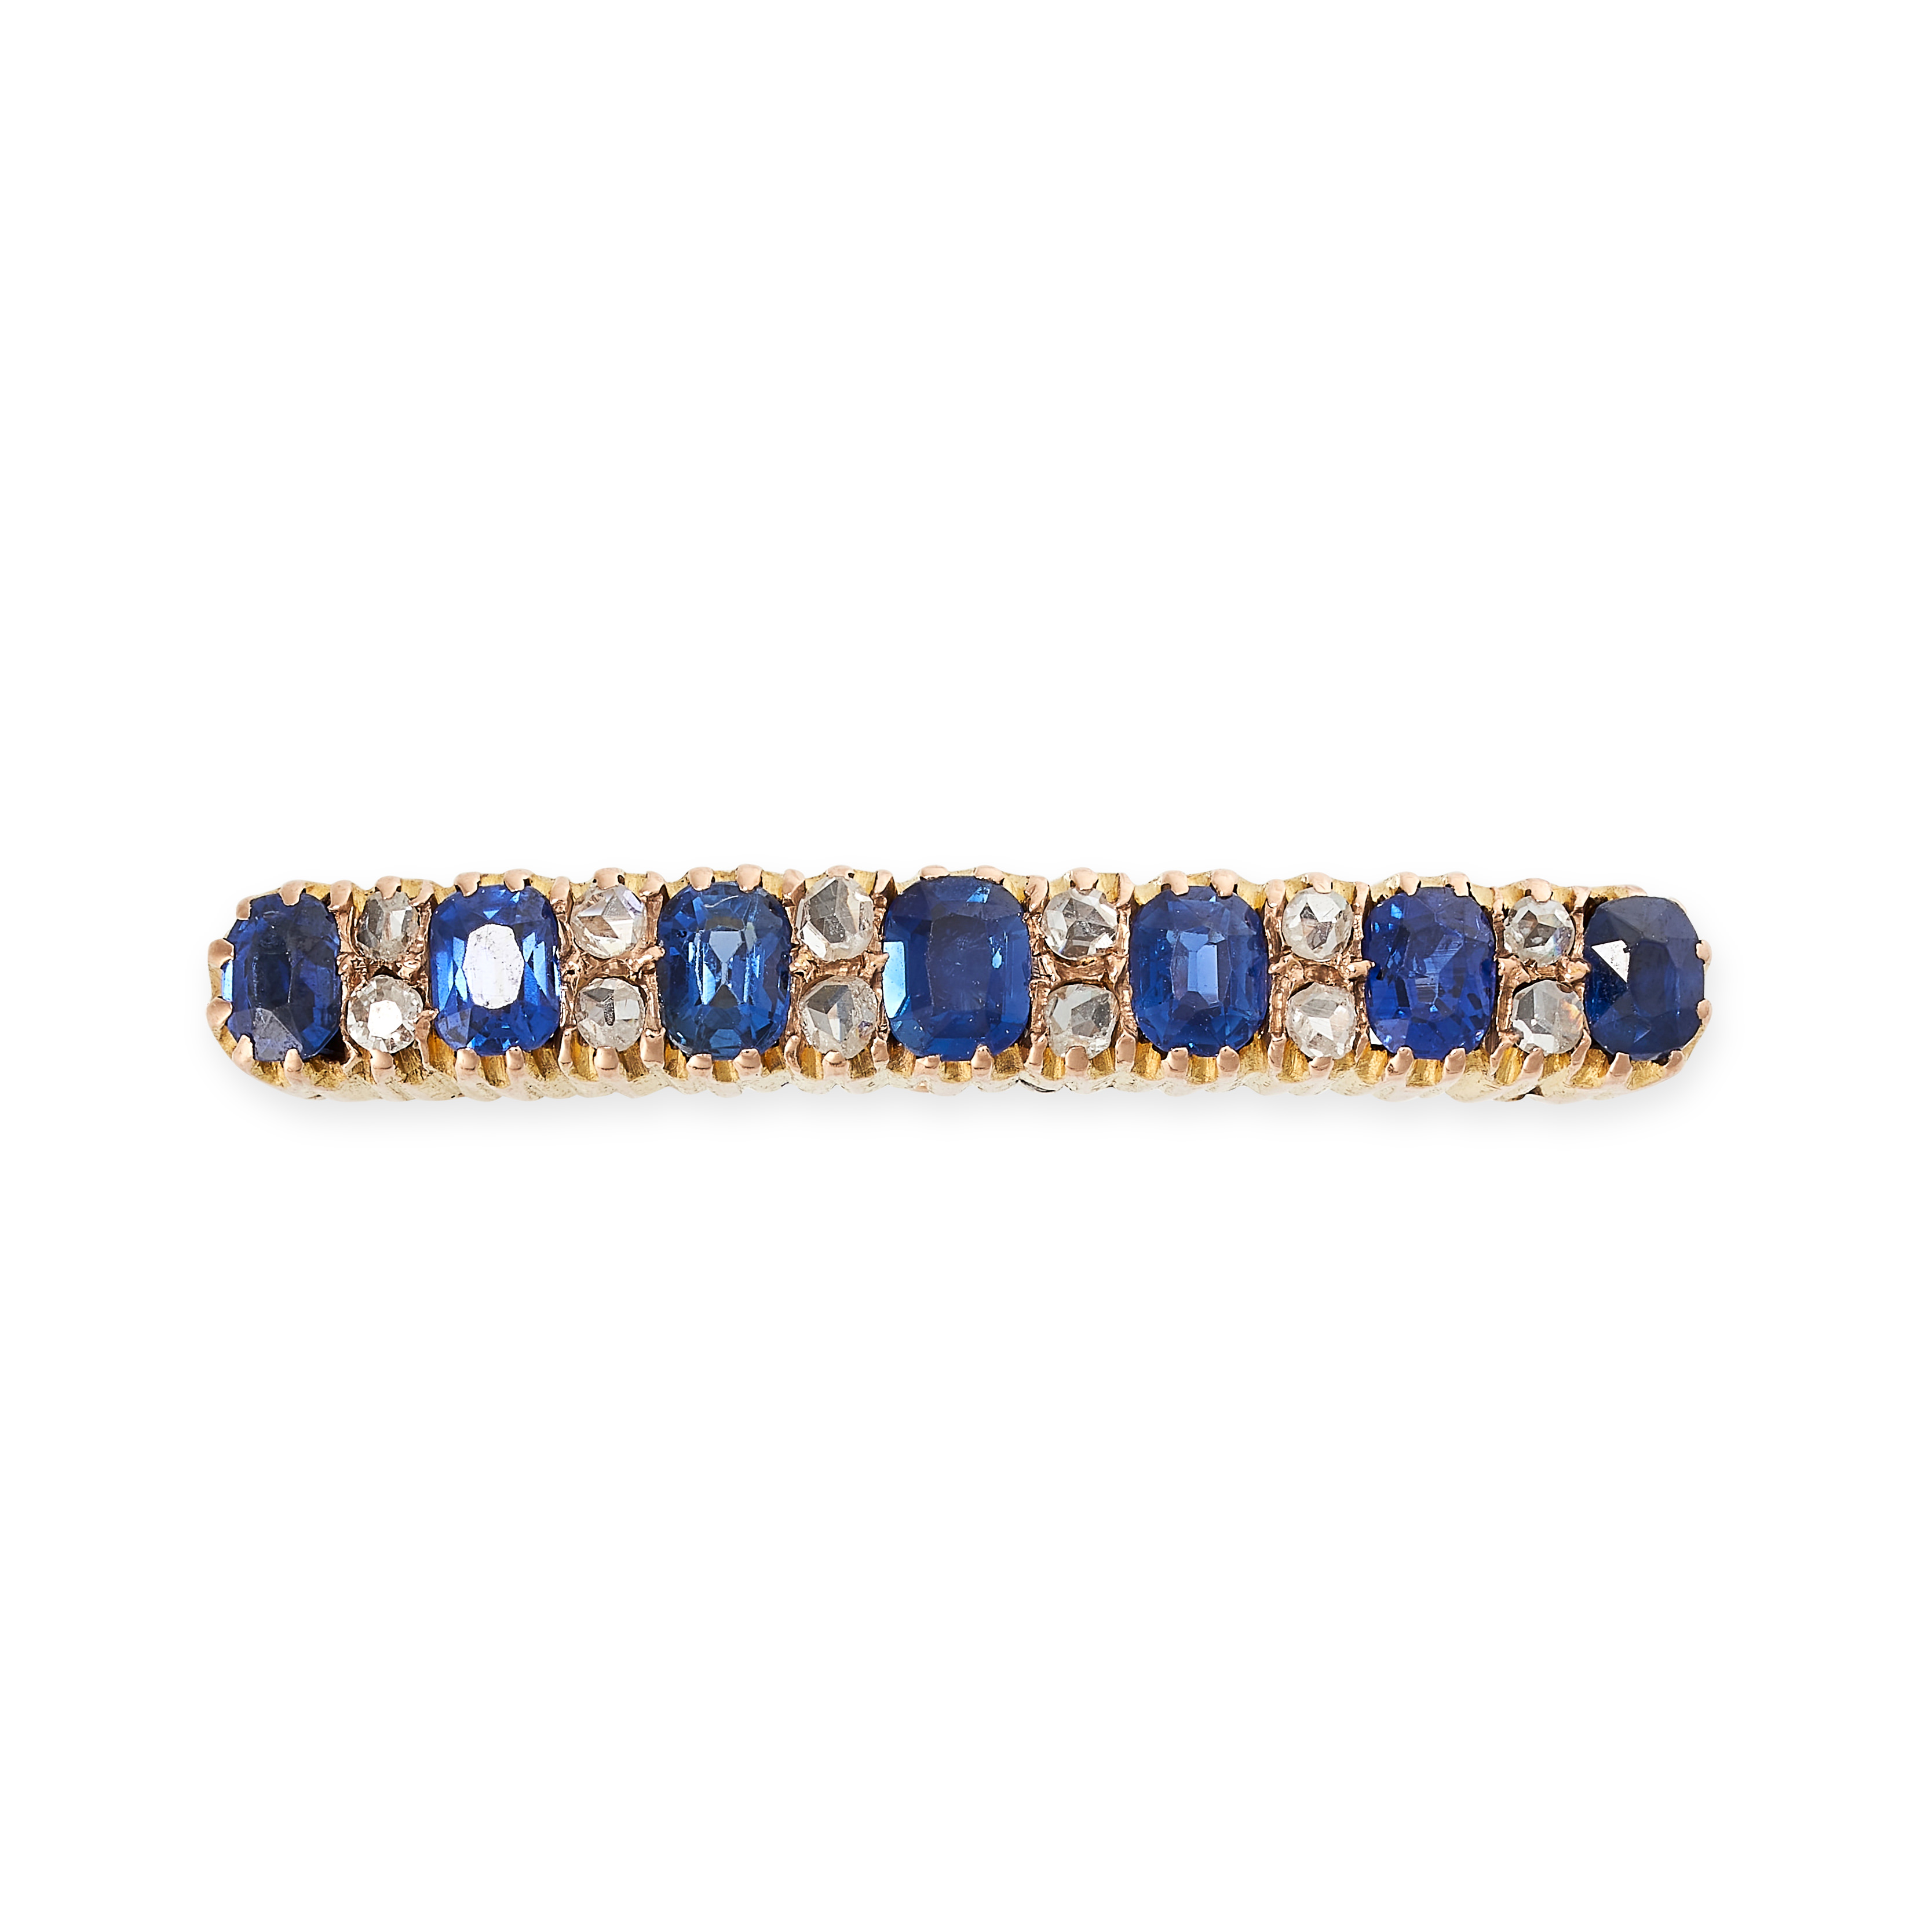 AN ANTIQUE SAPPHIRE AND DIAMOND BAR BROOCH in yellow gold, set with a row of seven graduated cushion